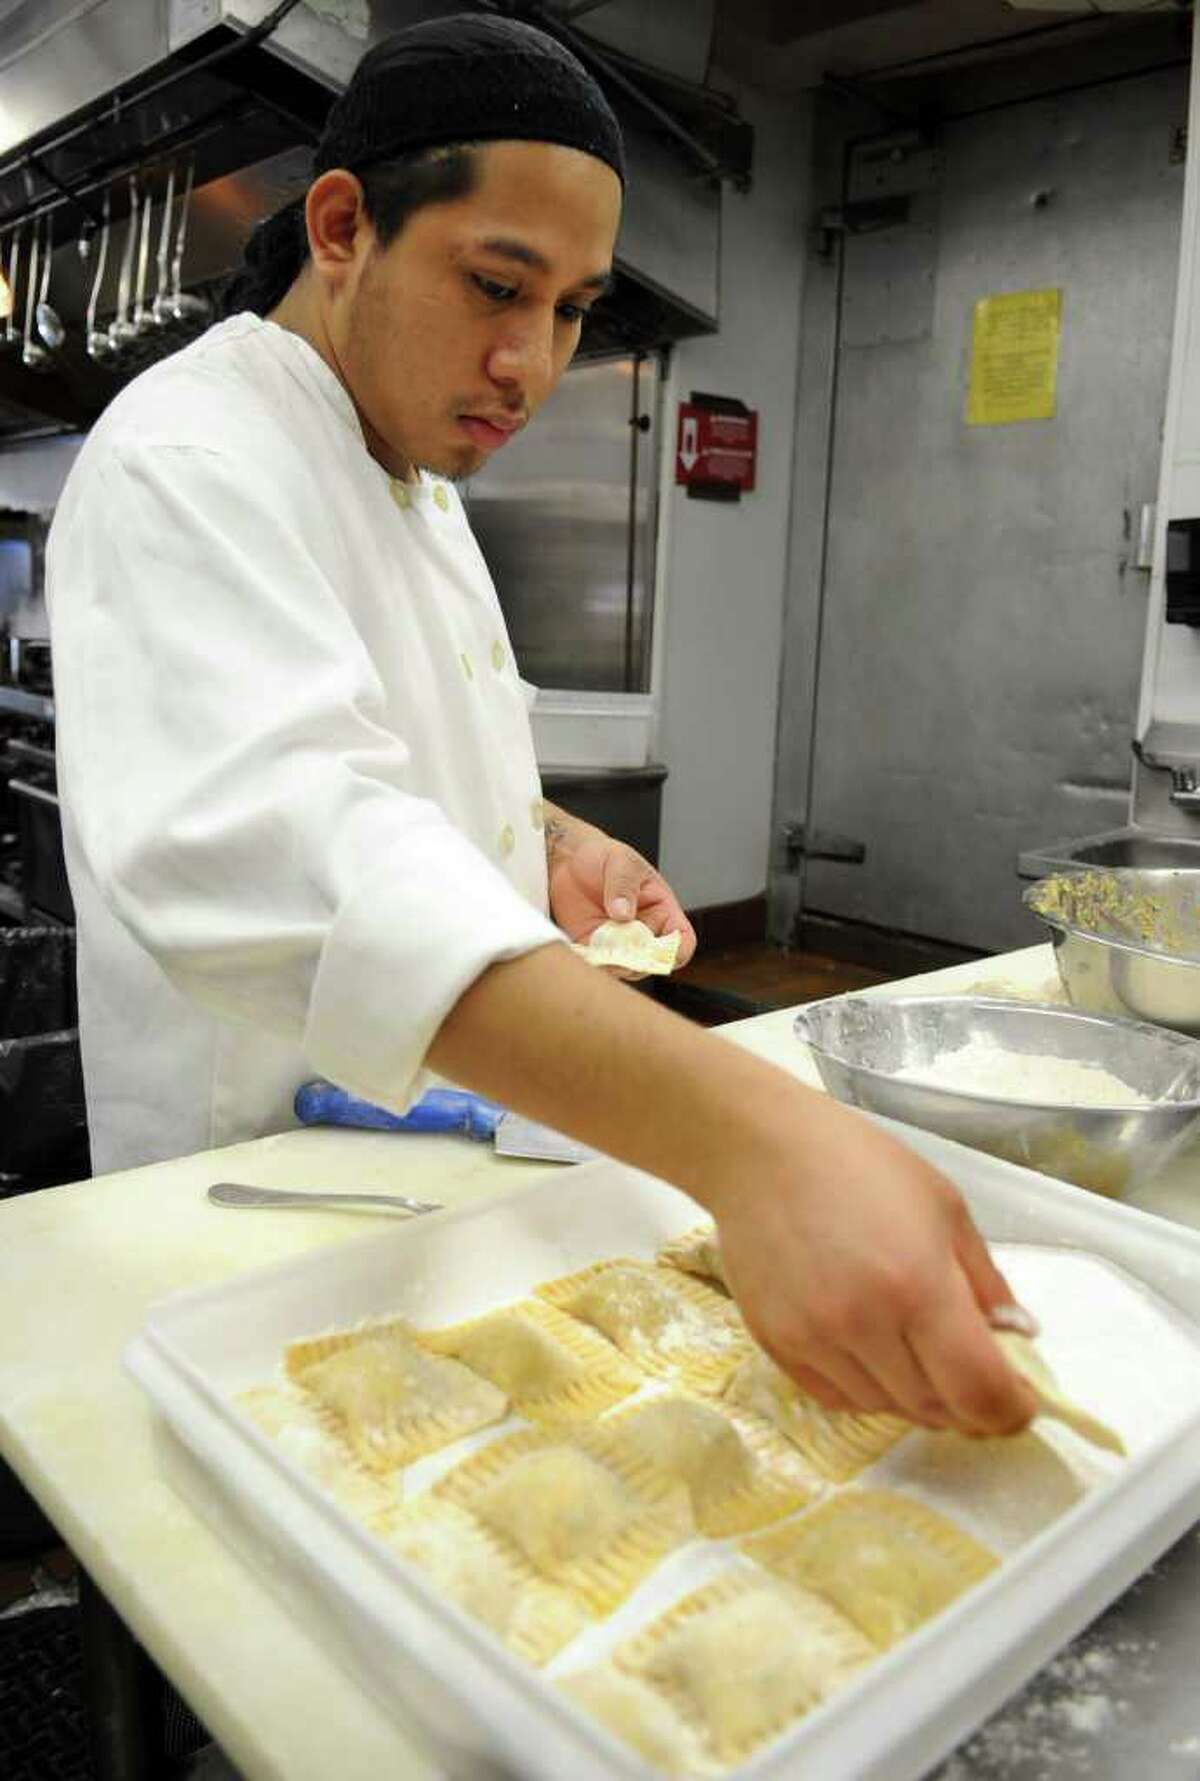 Salvatore Rivera makes bolognese ravioli at Madonia restaurant on Long Ridge Road in Stamford on Tuesday, March 13, 2012.